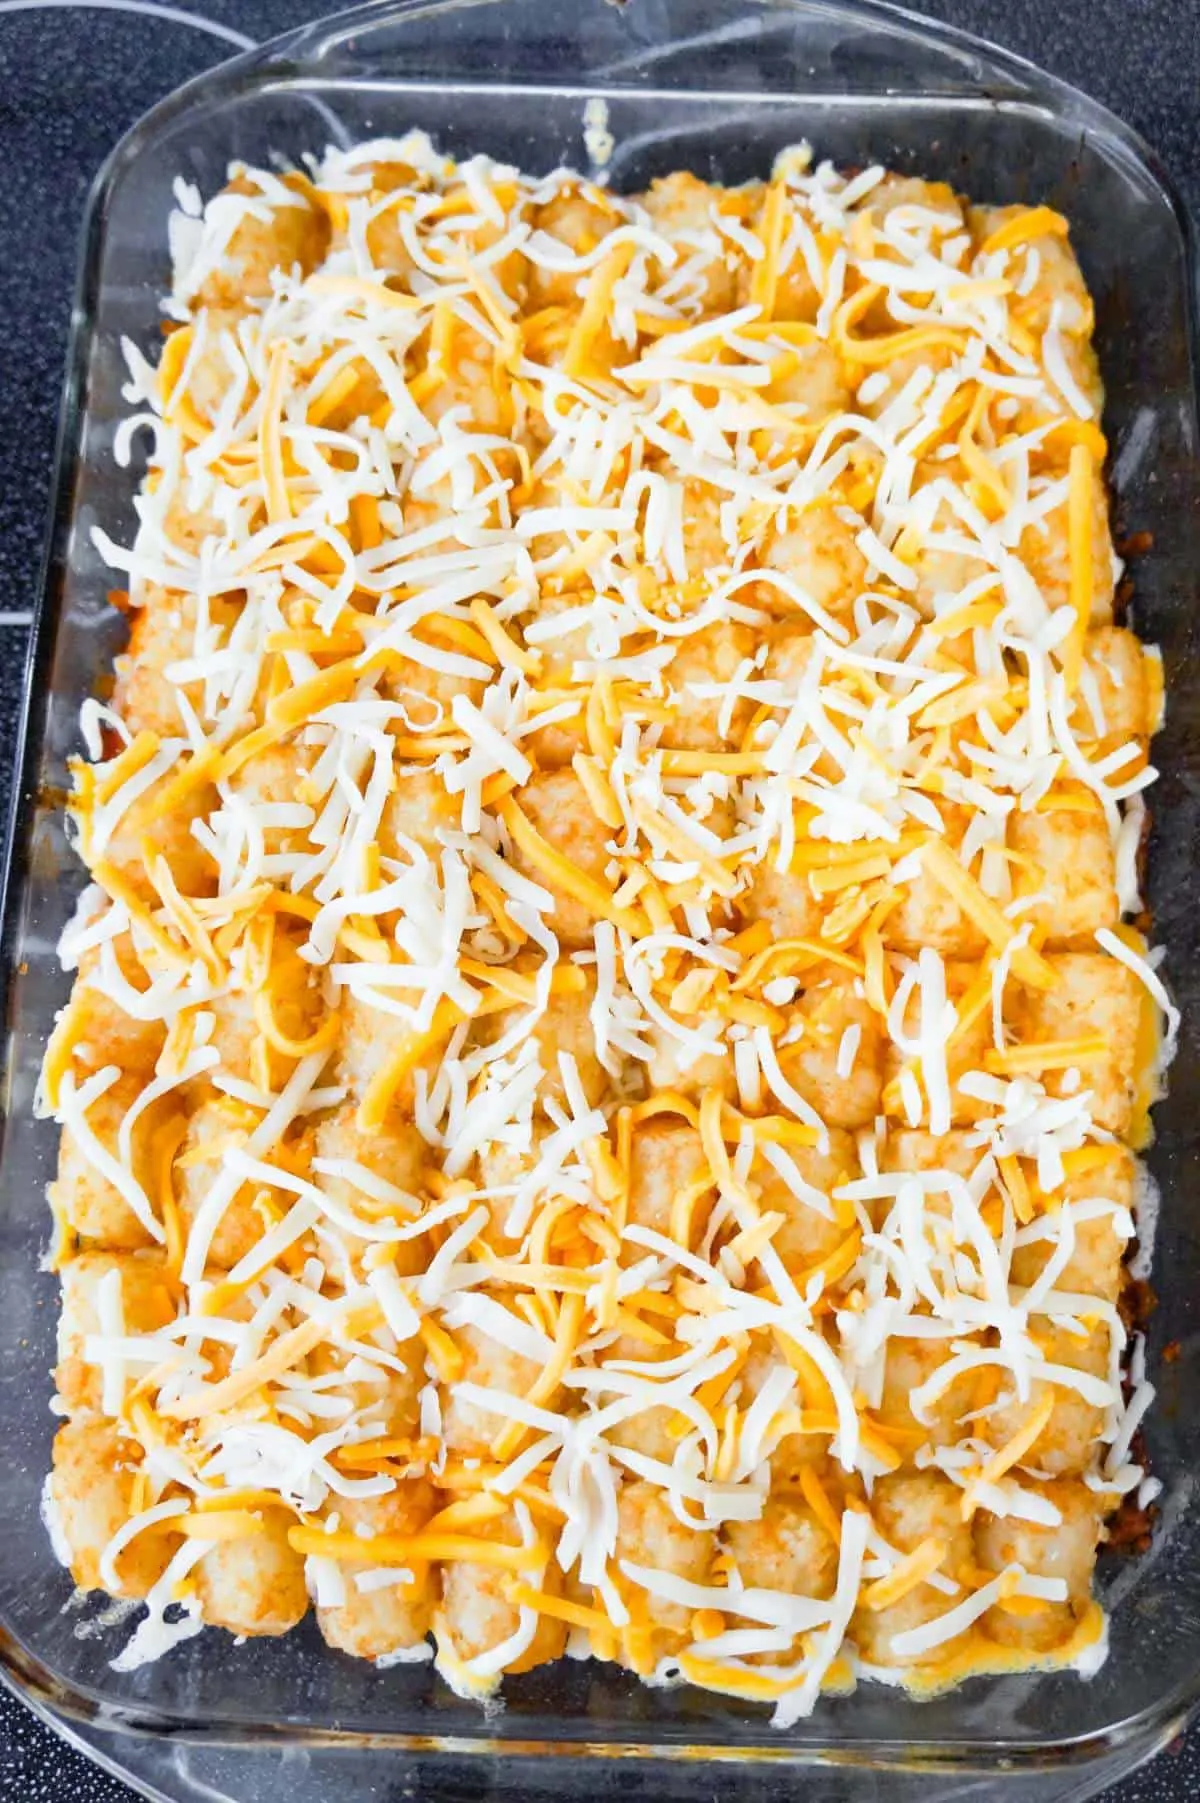 shredded cheese on top of tater tot casserole